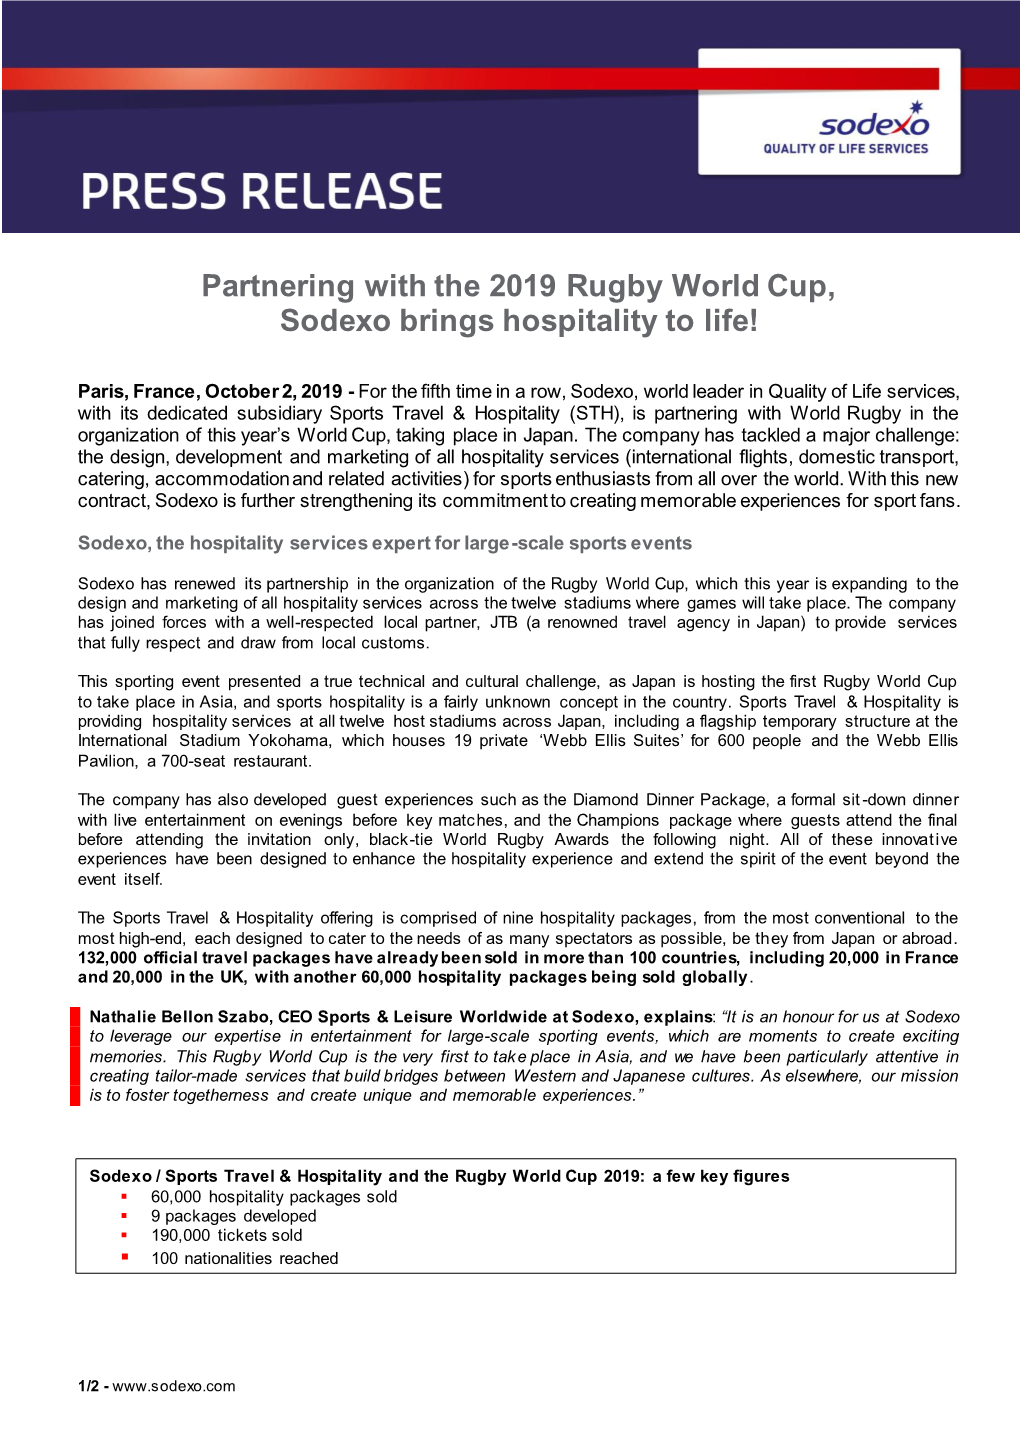 Partnering with the 2019 Rugby World Cup, Sodexo Brings Hospitality to Life!